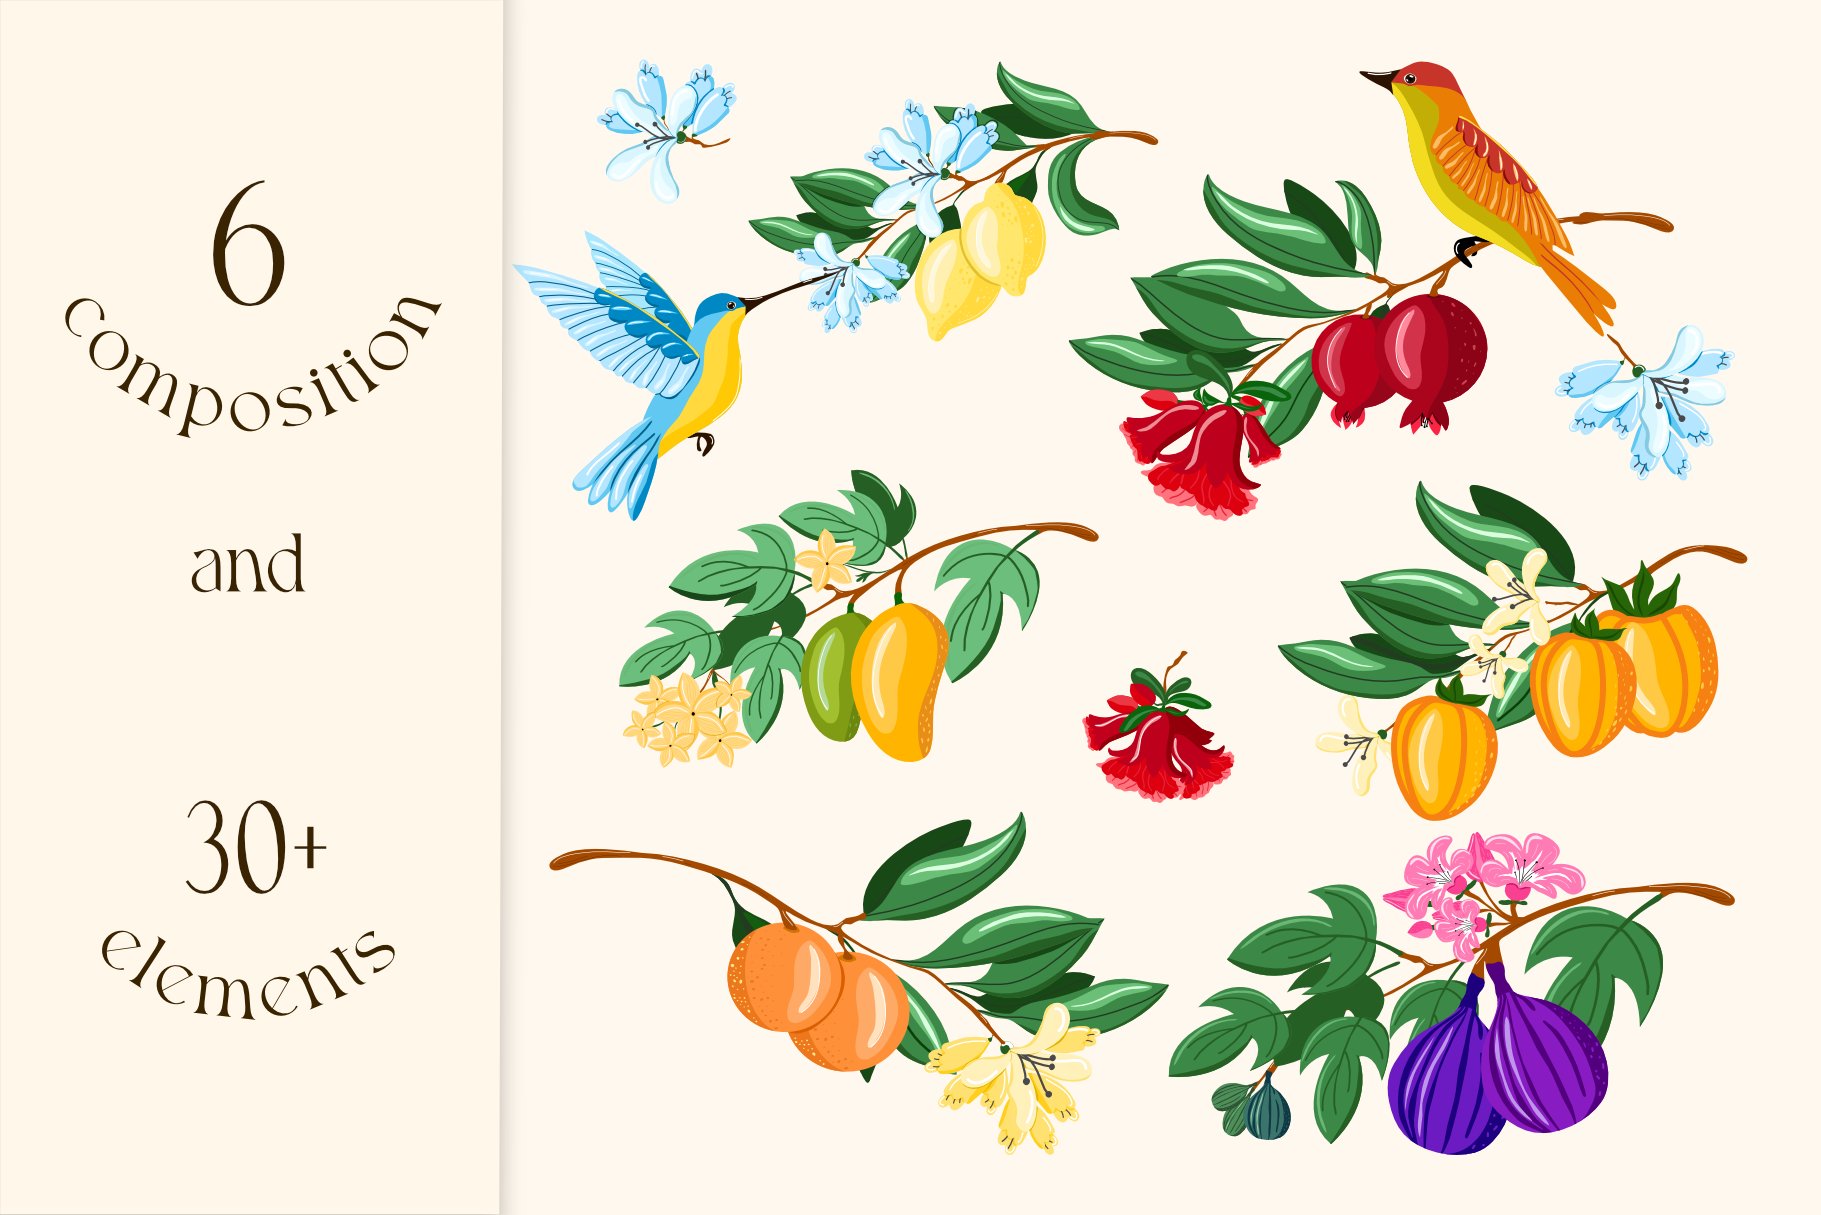 So bright and beautiful elements for fresh spring illustration.